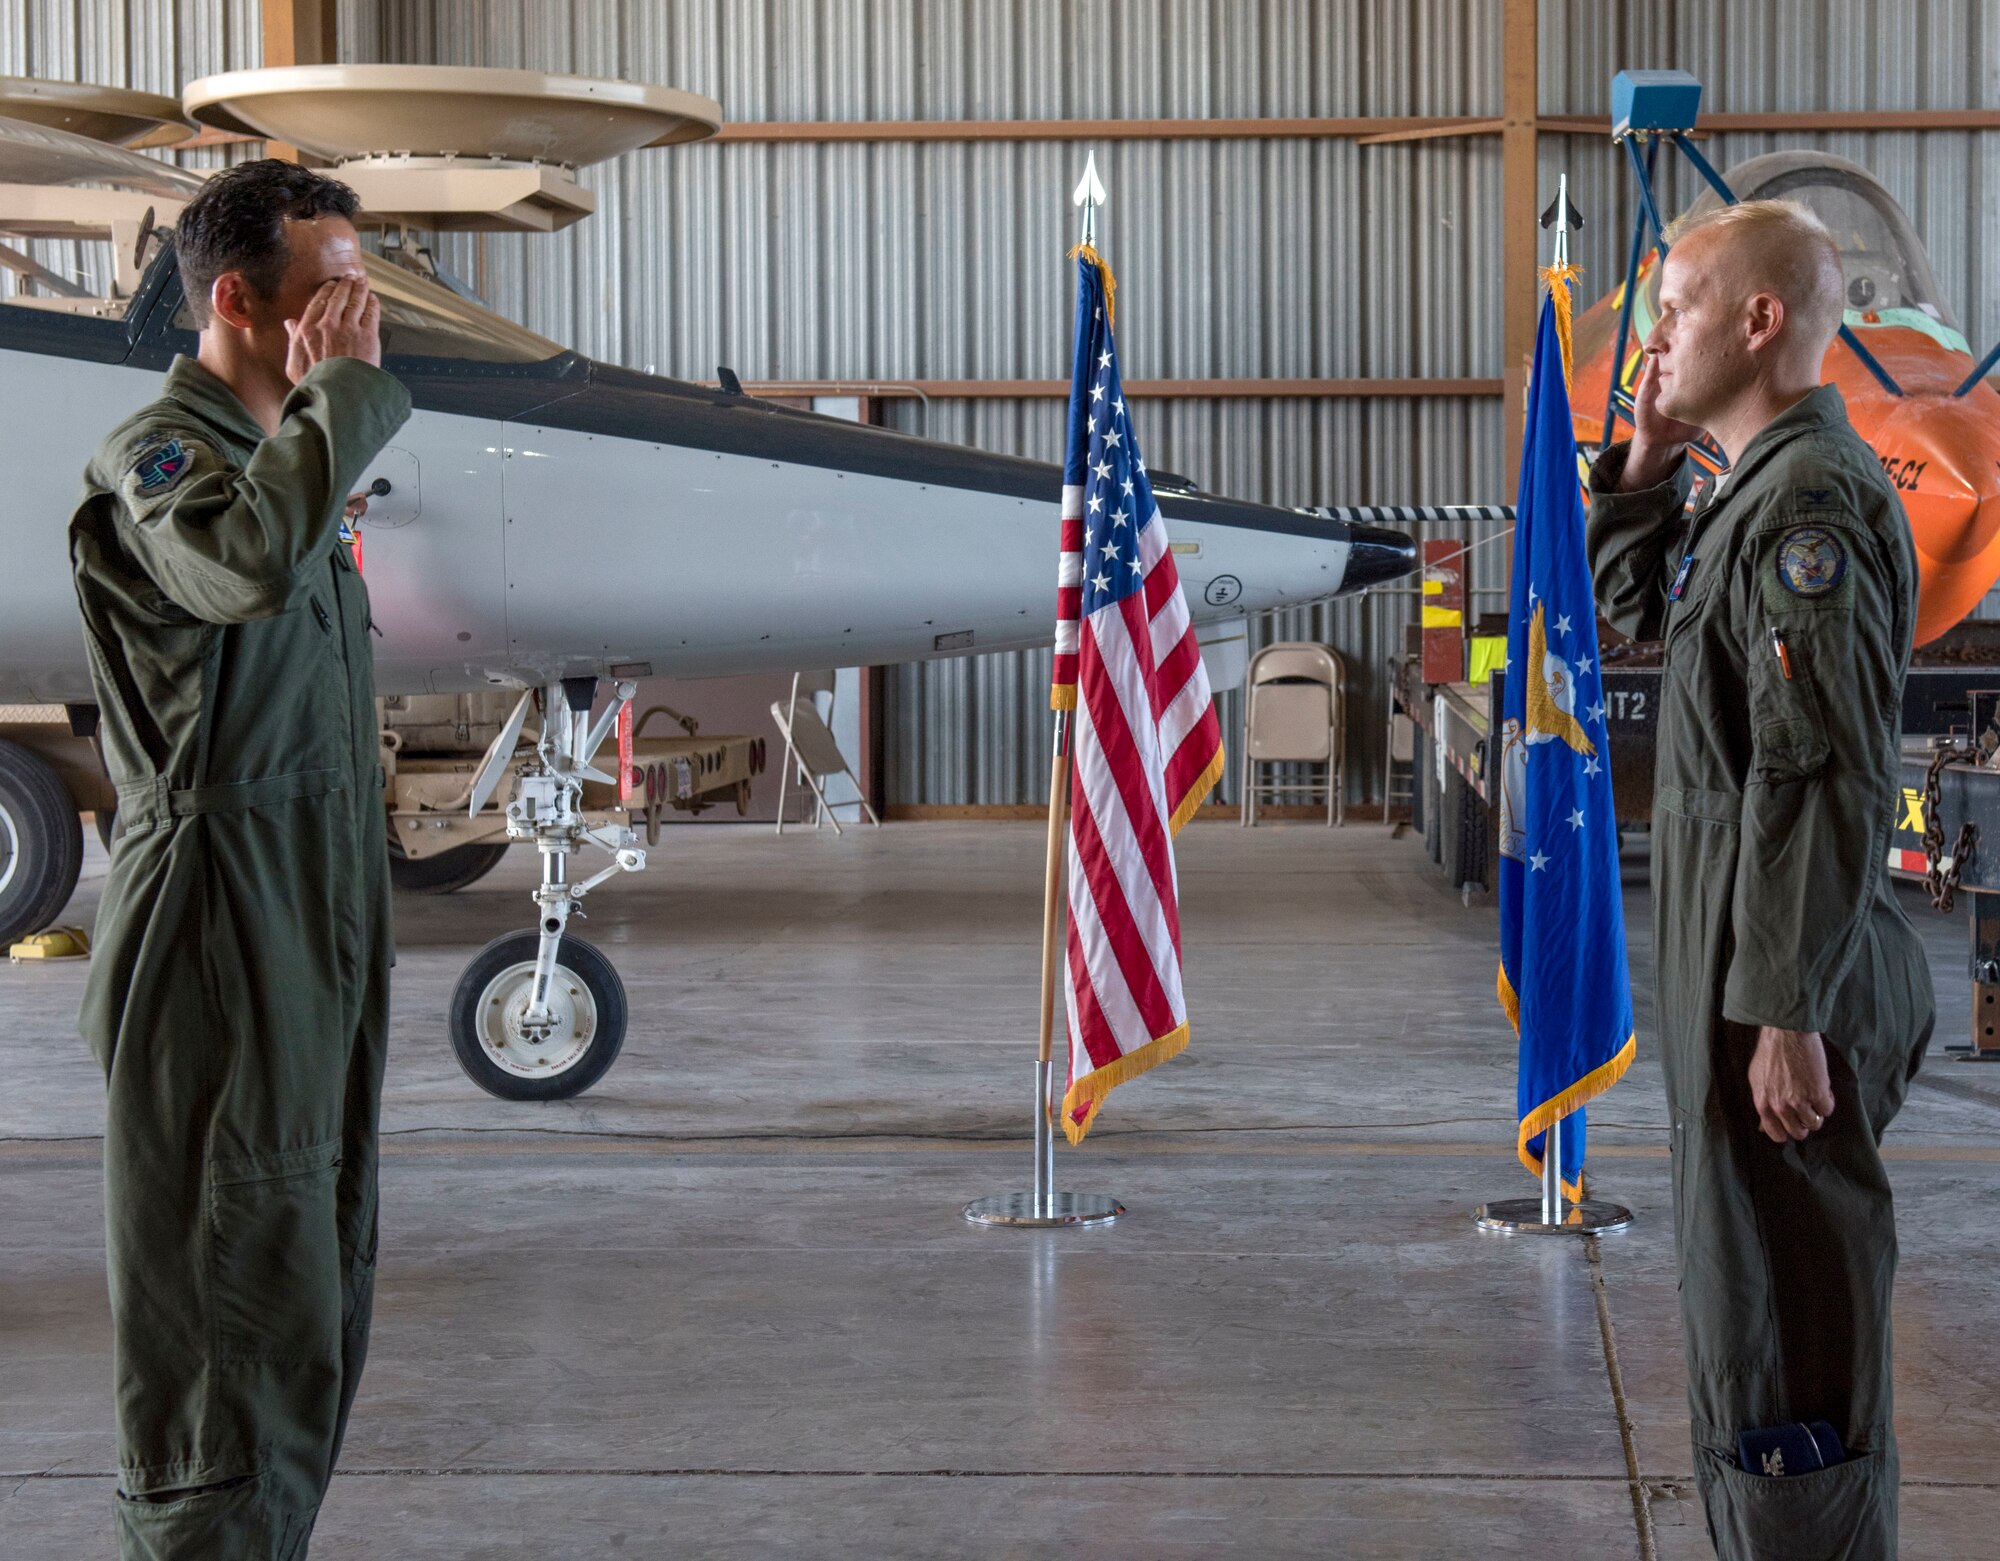 AEDC Commander Col. Jeffrey Geraghty, left, and the new 704th Test Group Commander Col. Darren Wees exchange salutes during a Change of Command ceremony July 1 at Holloman Air Force Base, New Mexico. On that date, Wees officially assumed command of the 704 TG. (U.S. Air Force photo by Airman 1st Class Quion Lowe)